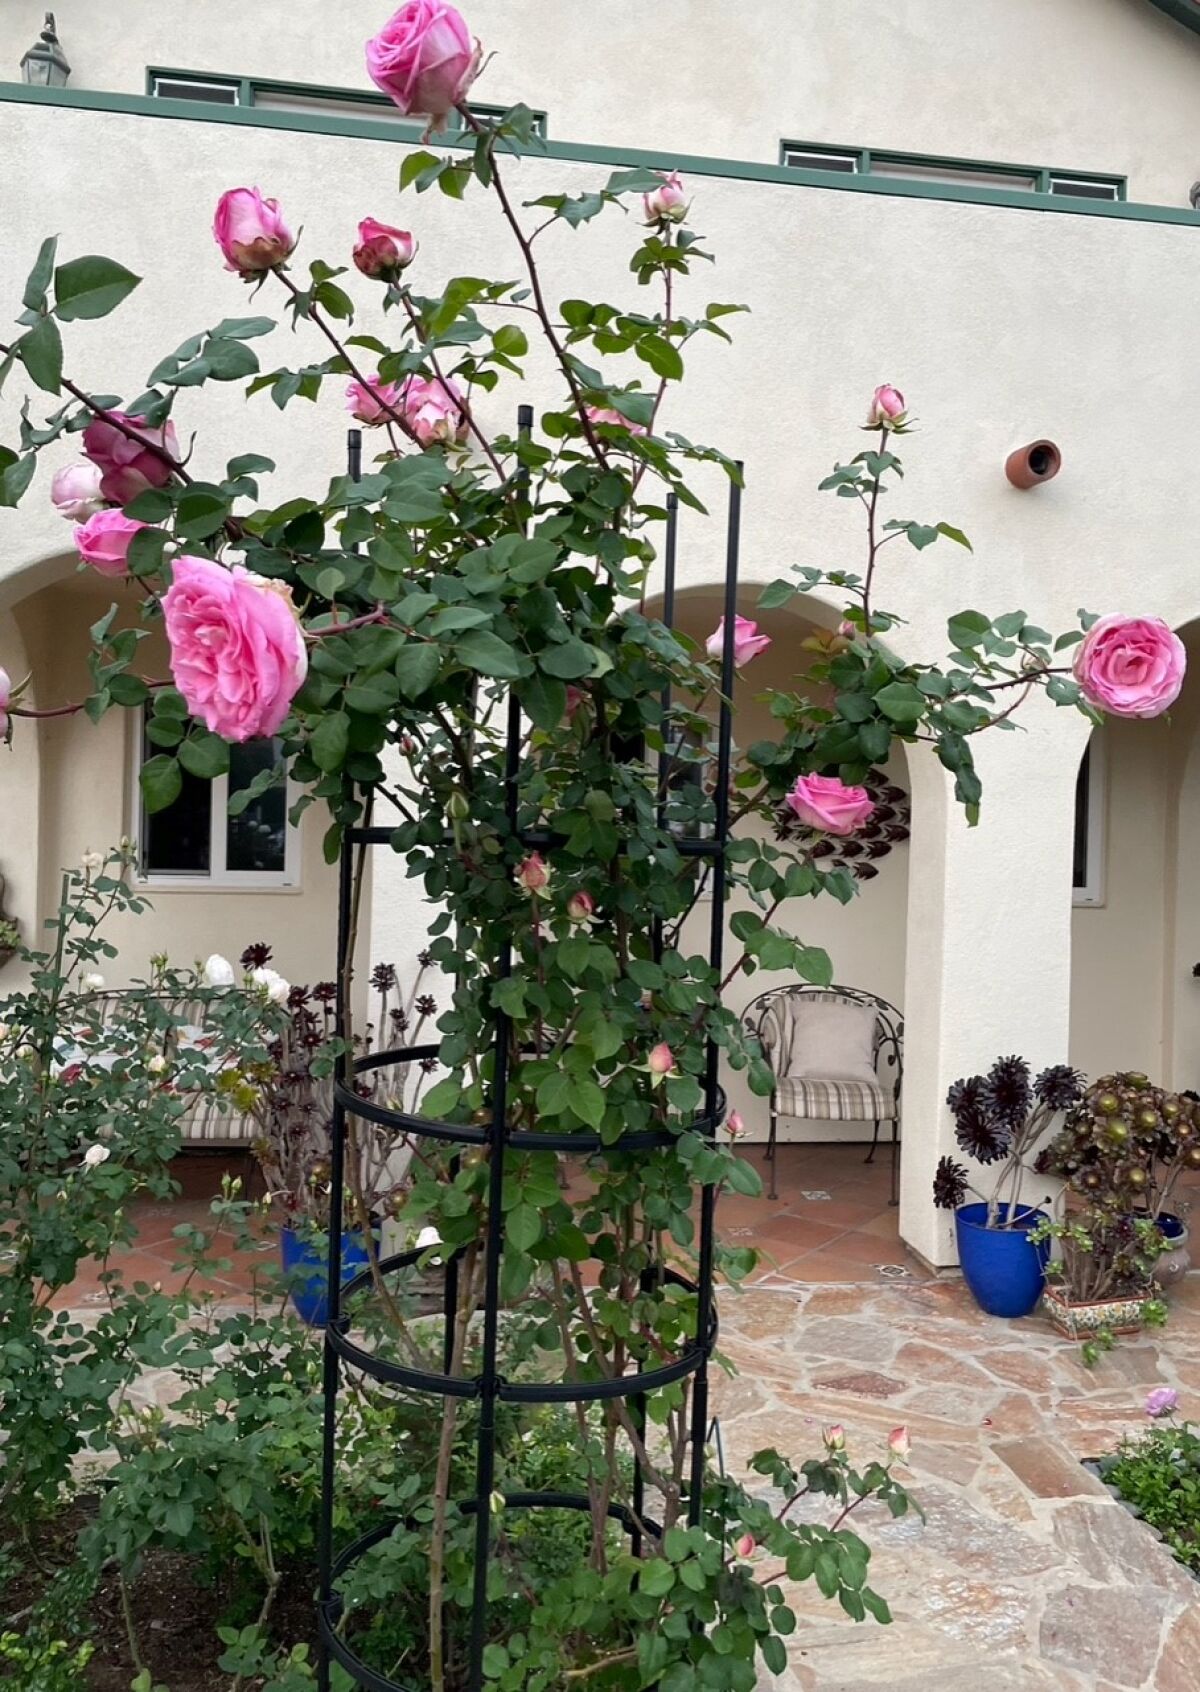 'Beverly' rose grafted onto Fortuniana rootstock has 6-foot canes reined into a pillar structure.